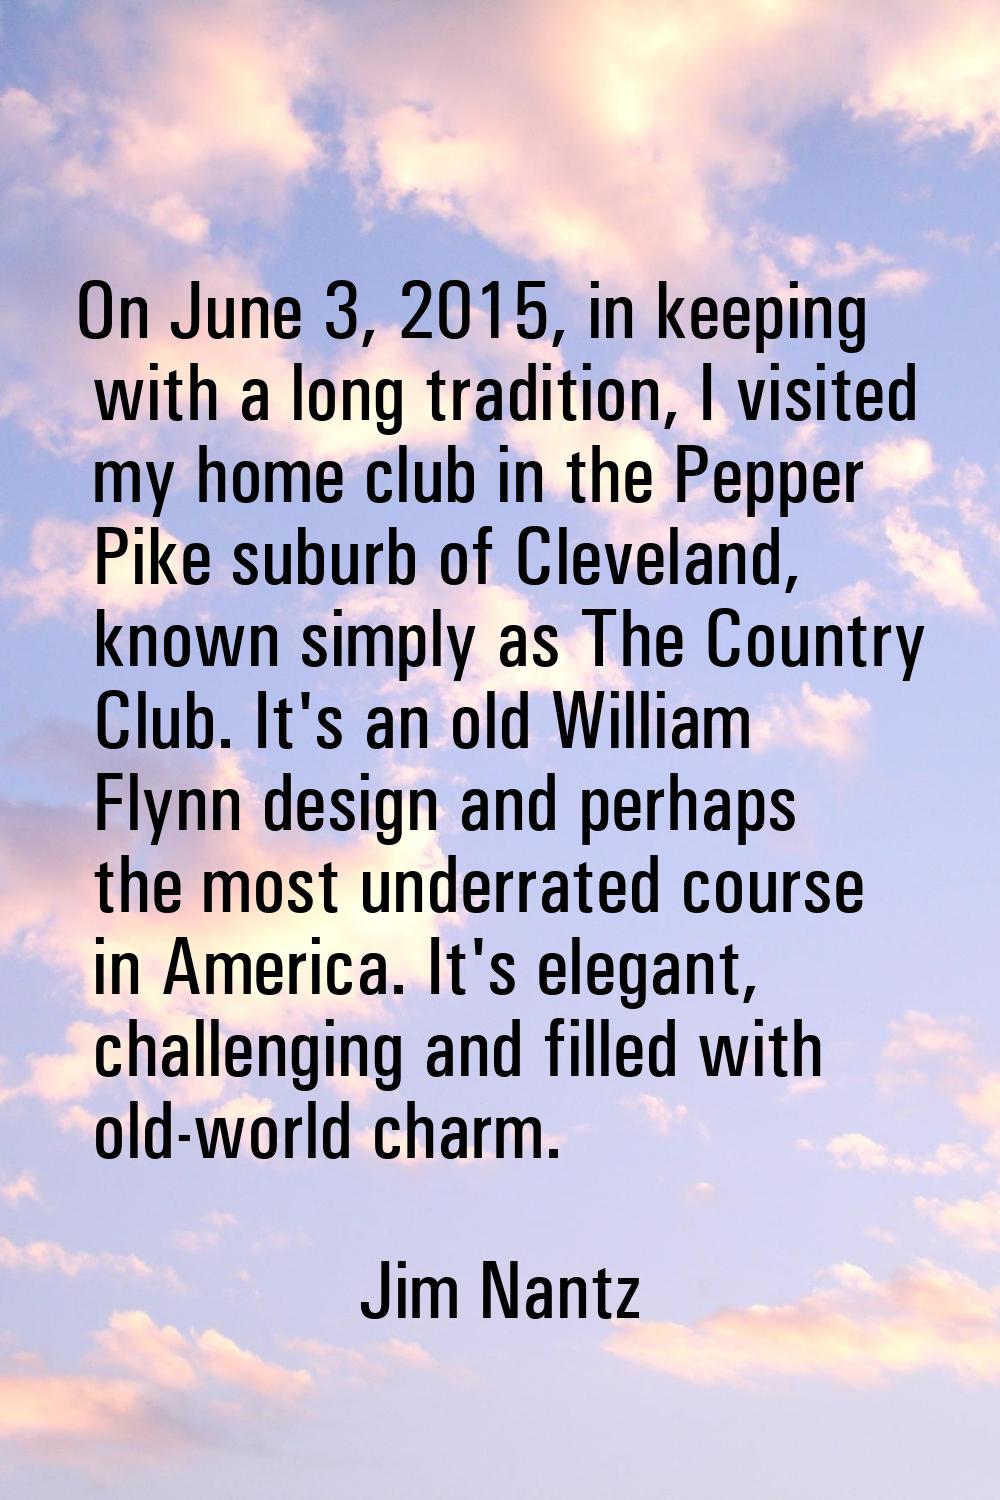 On June 3, 2015, in keeping with a long tradition, I visited my home club in the Pepper Pike suburb